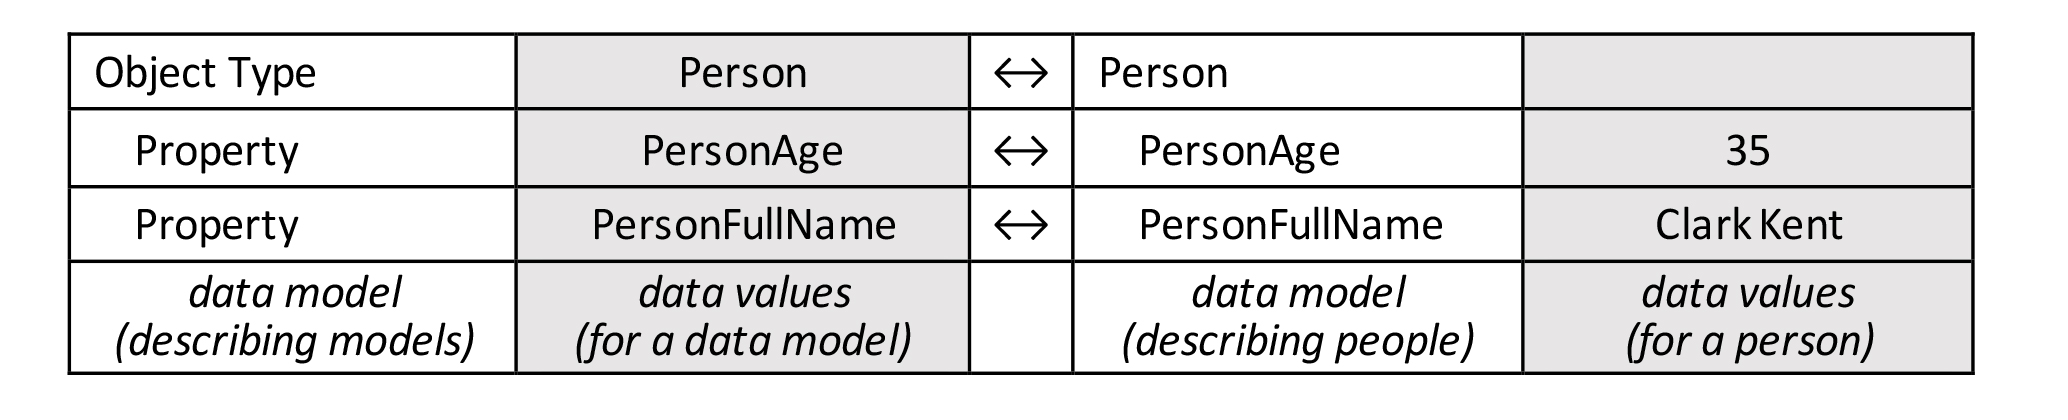 Object and Person Table Combined